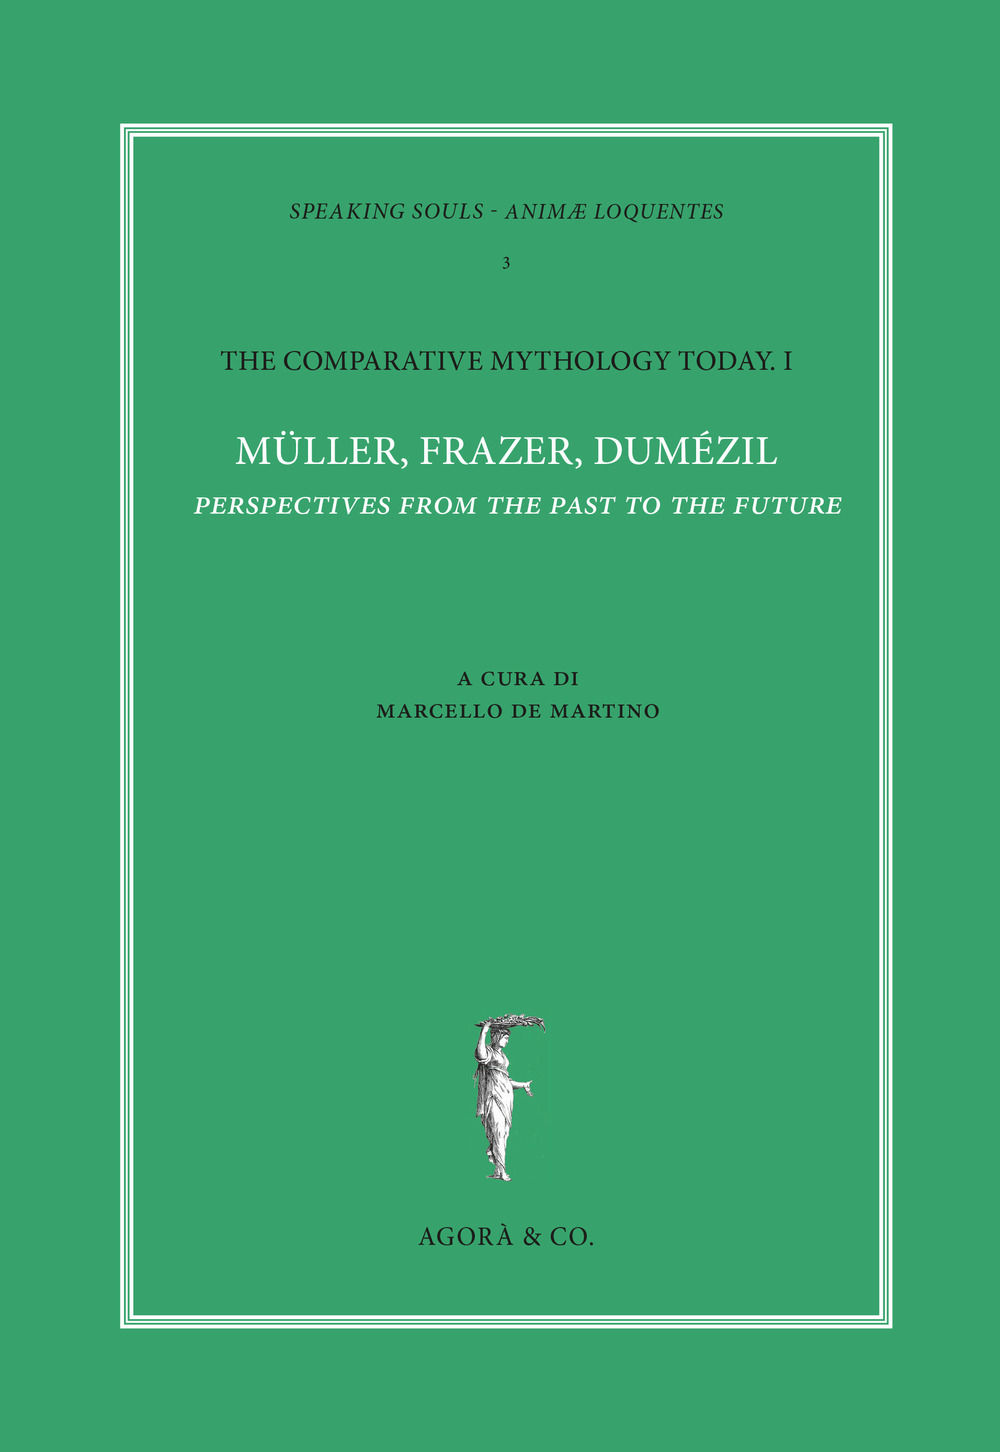 The comparative mythology today. Vol. 1: Müller, Frazer, Dumézil. Perspectives from the past to the future. Atti del convegno Academia Belgica (Roma, 12 ottobre 2017)